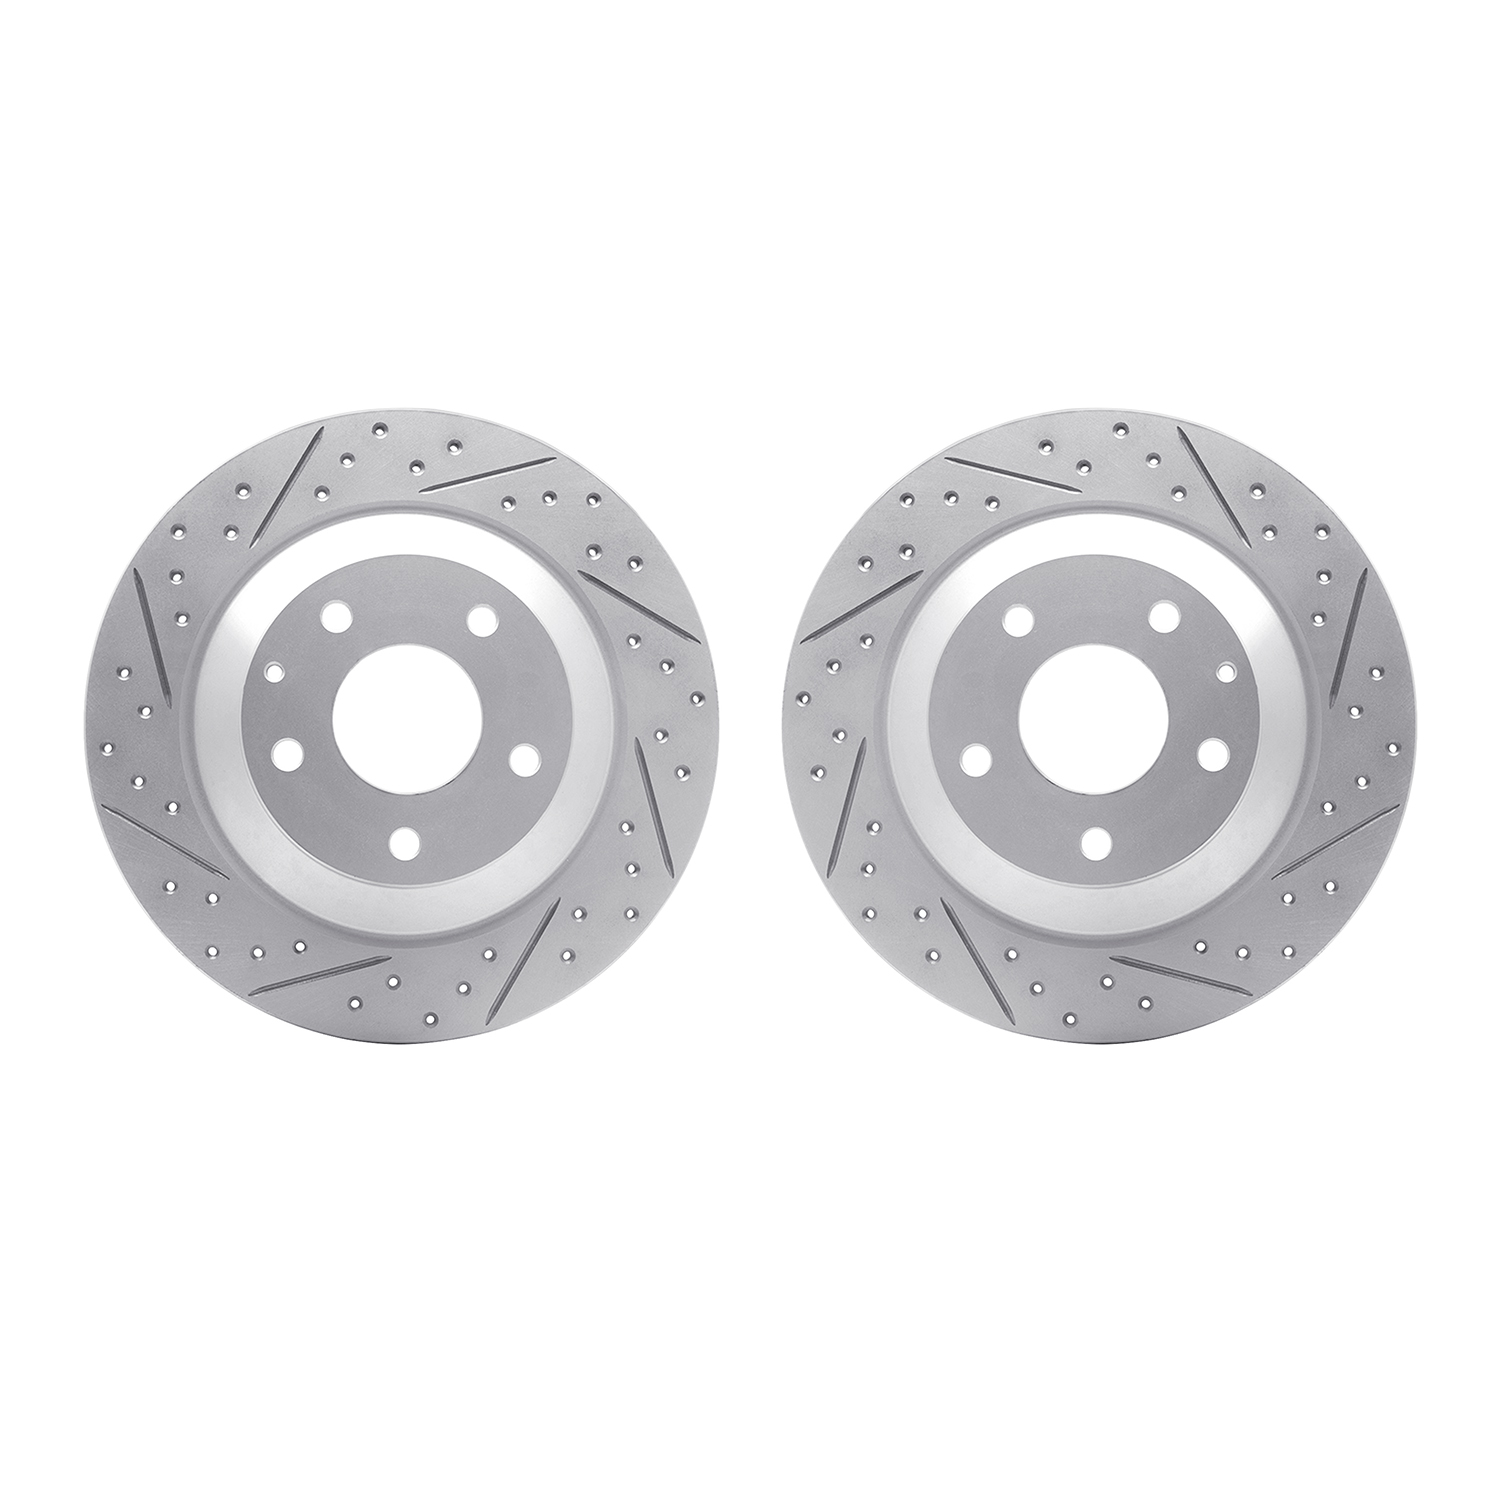 2002-80039 Geoperformance Drilled/Slotted Brake Rotors, 2013-2018 Ford/Lincoln/Mercury/Mazda, Position: Rear